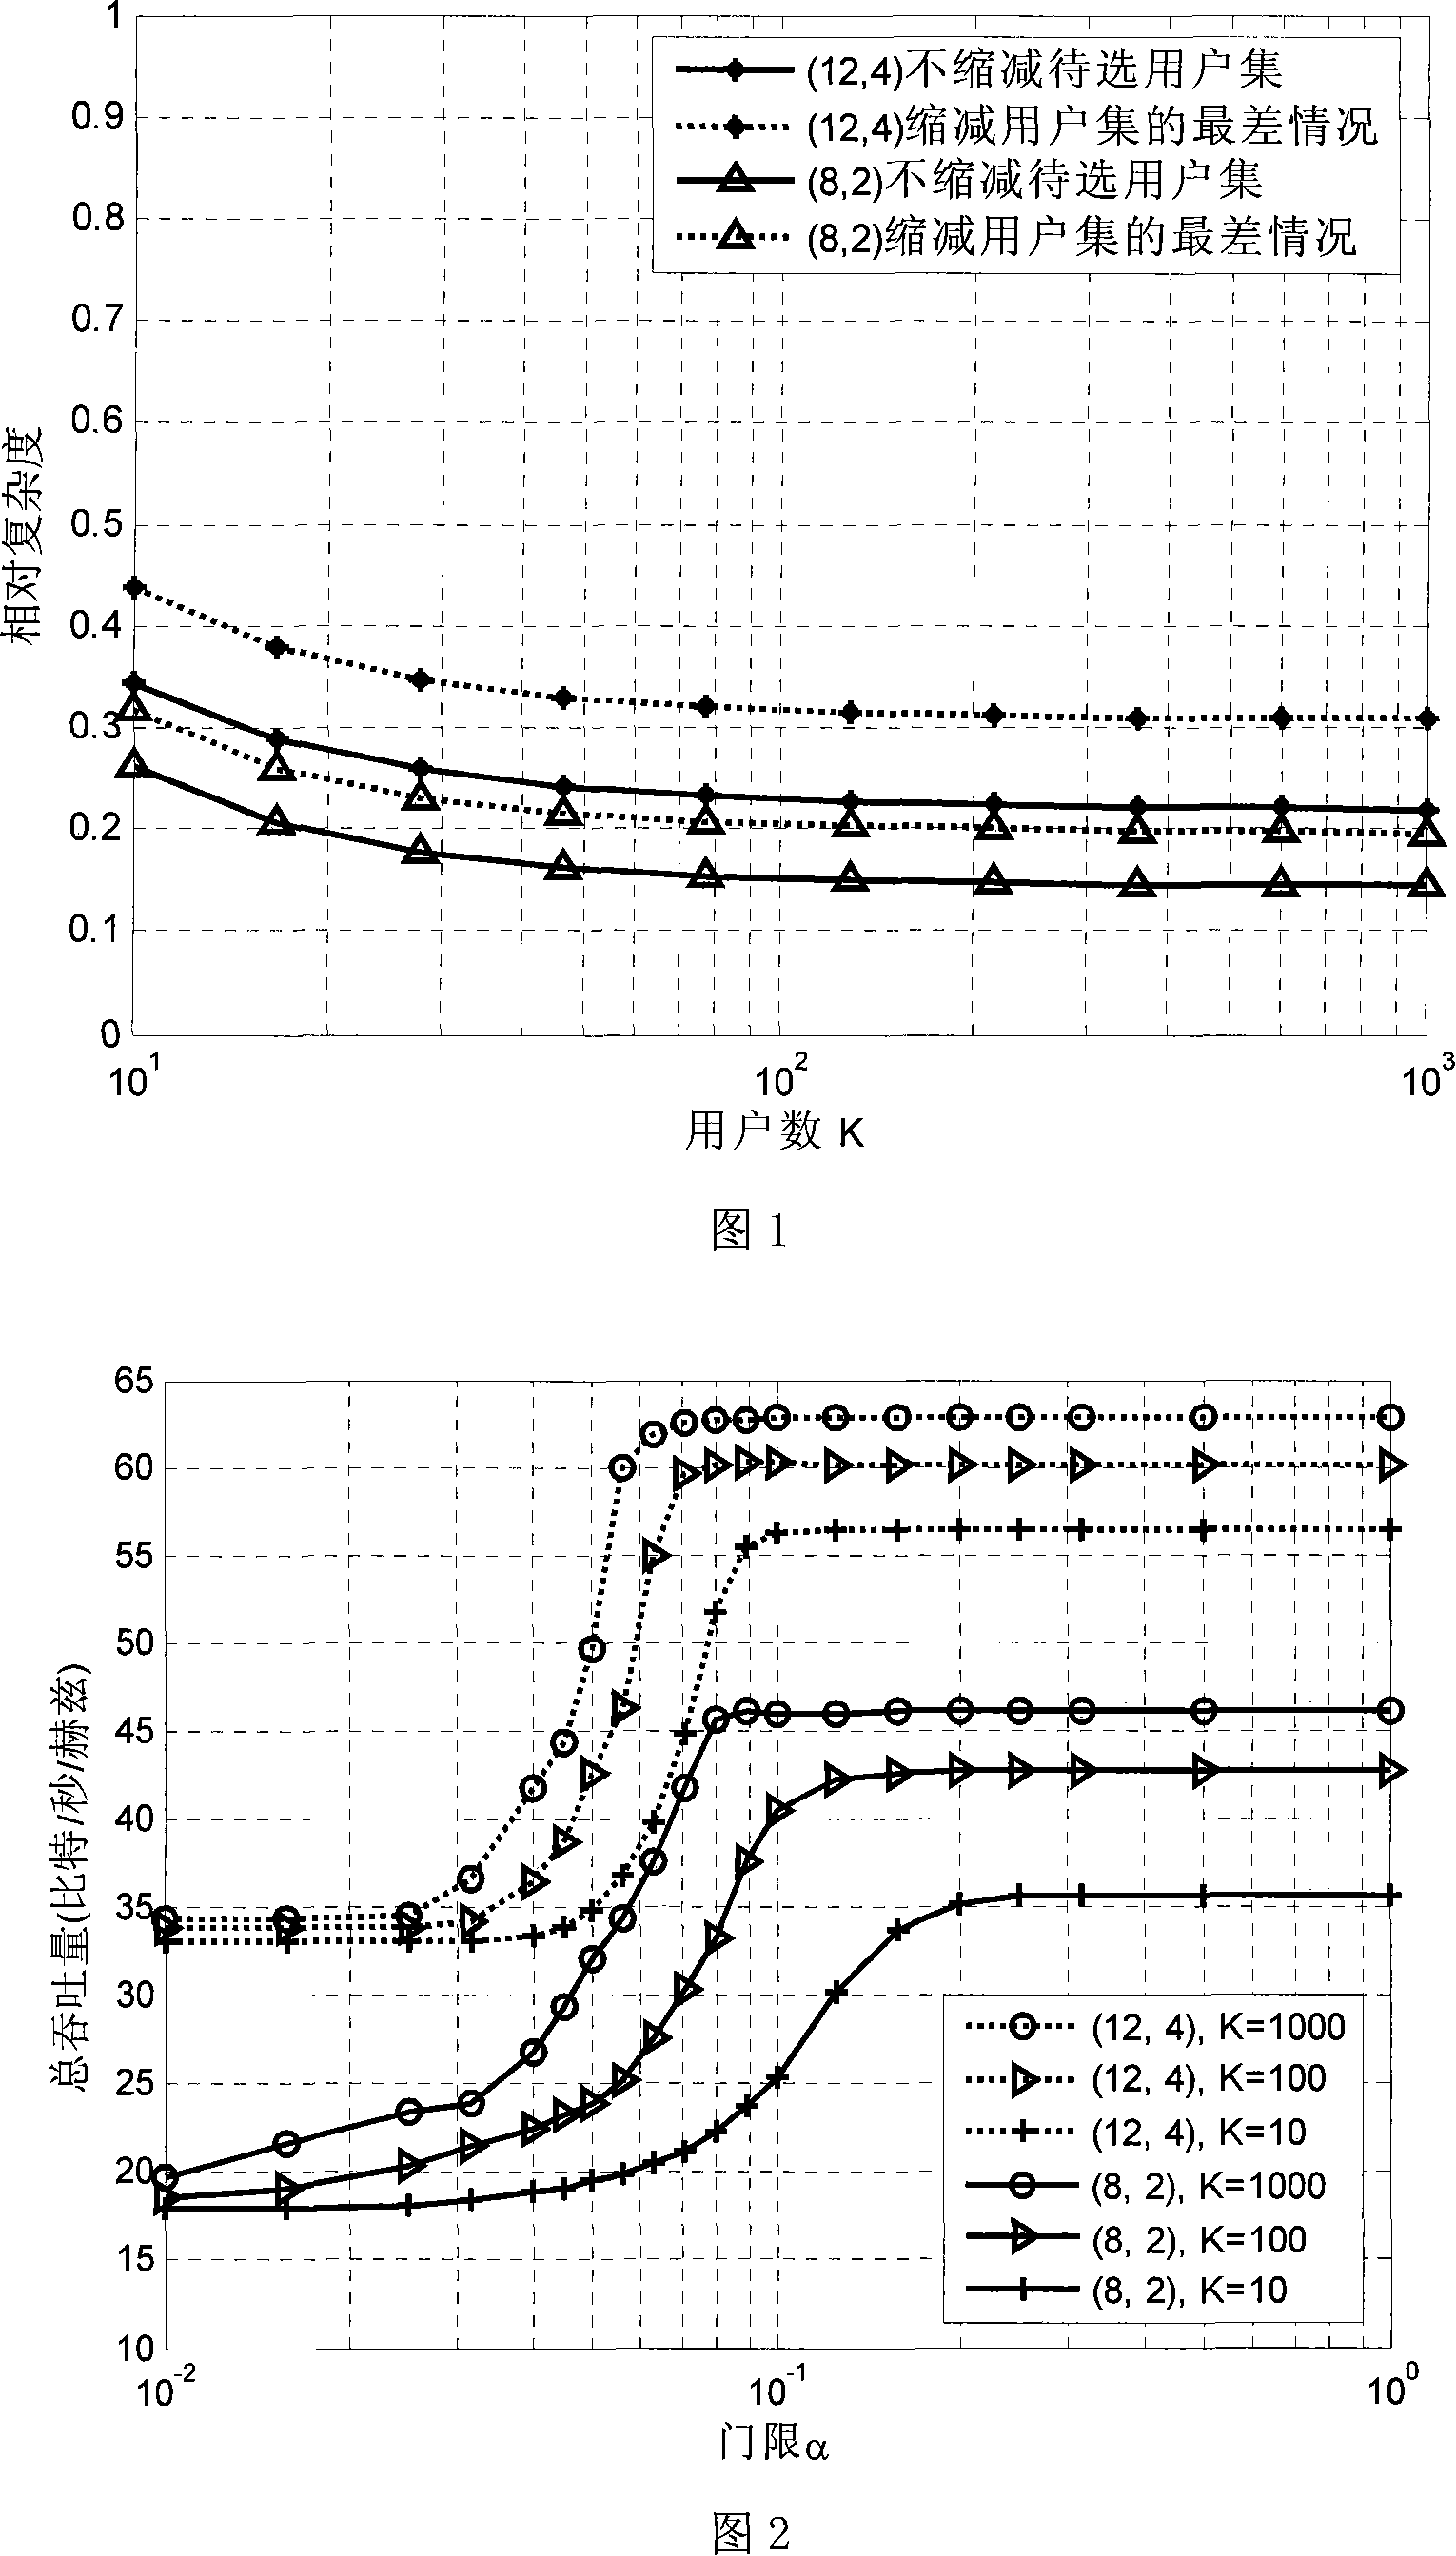 Improved multi-user selection method for block diagonally multi-in and multi-out system based on model